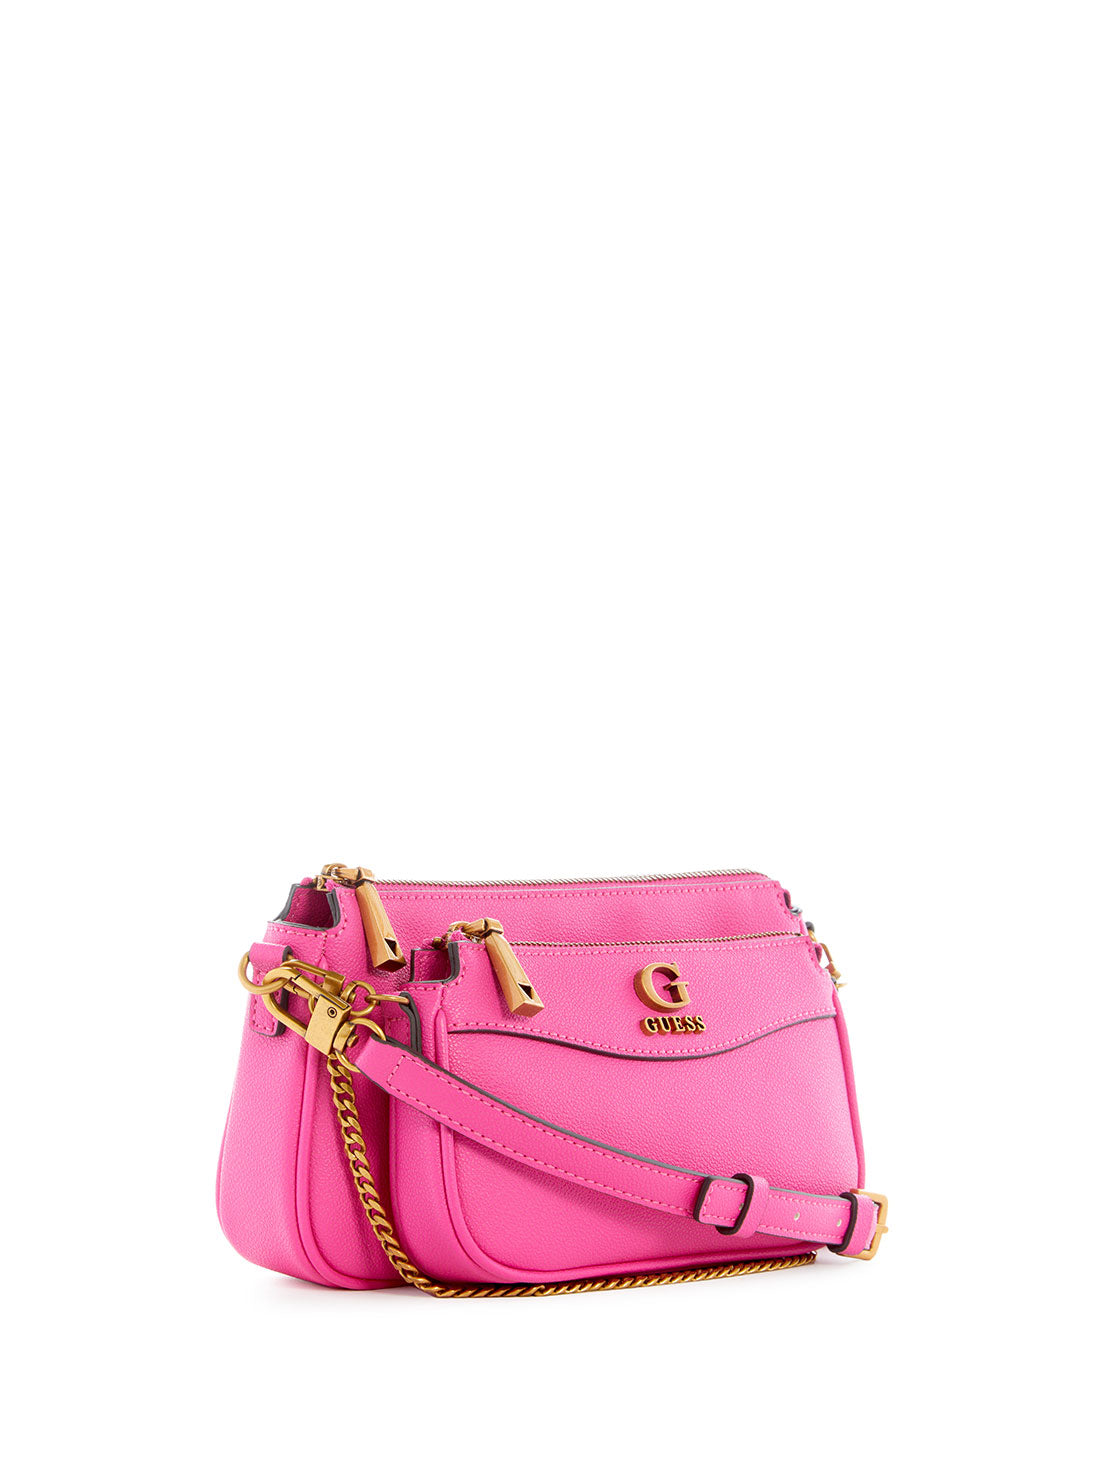 GUESS Women's Fuchsia Nell Crossbody Pouch Bag VB867870 Front Side View